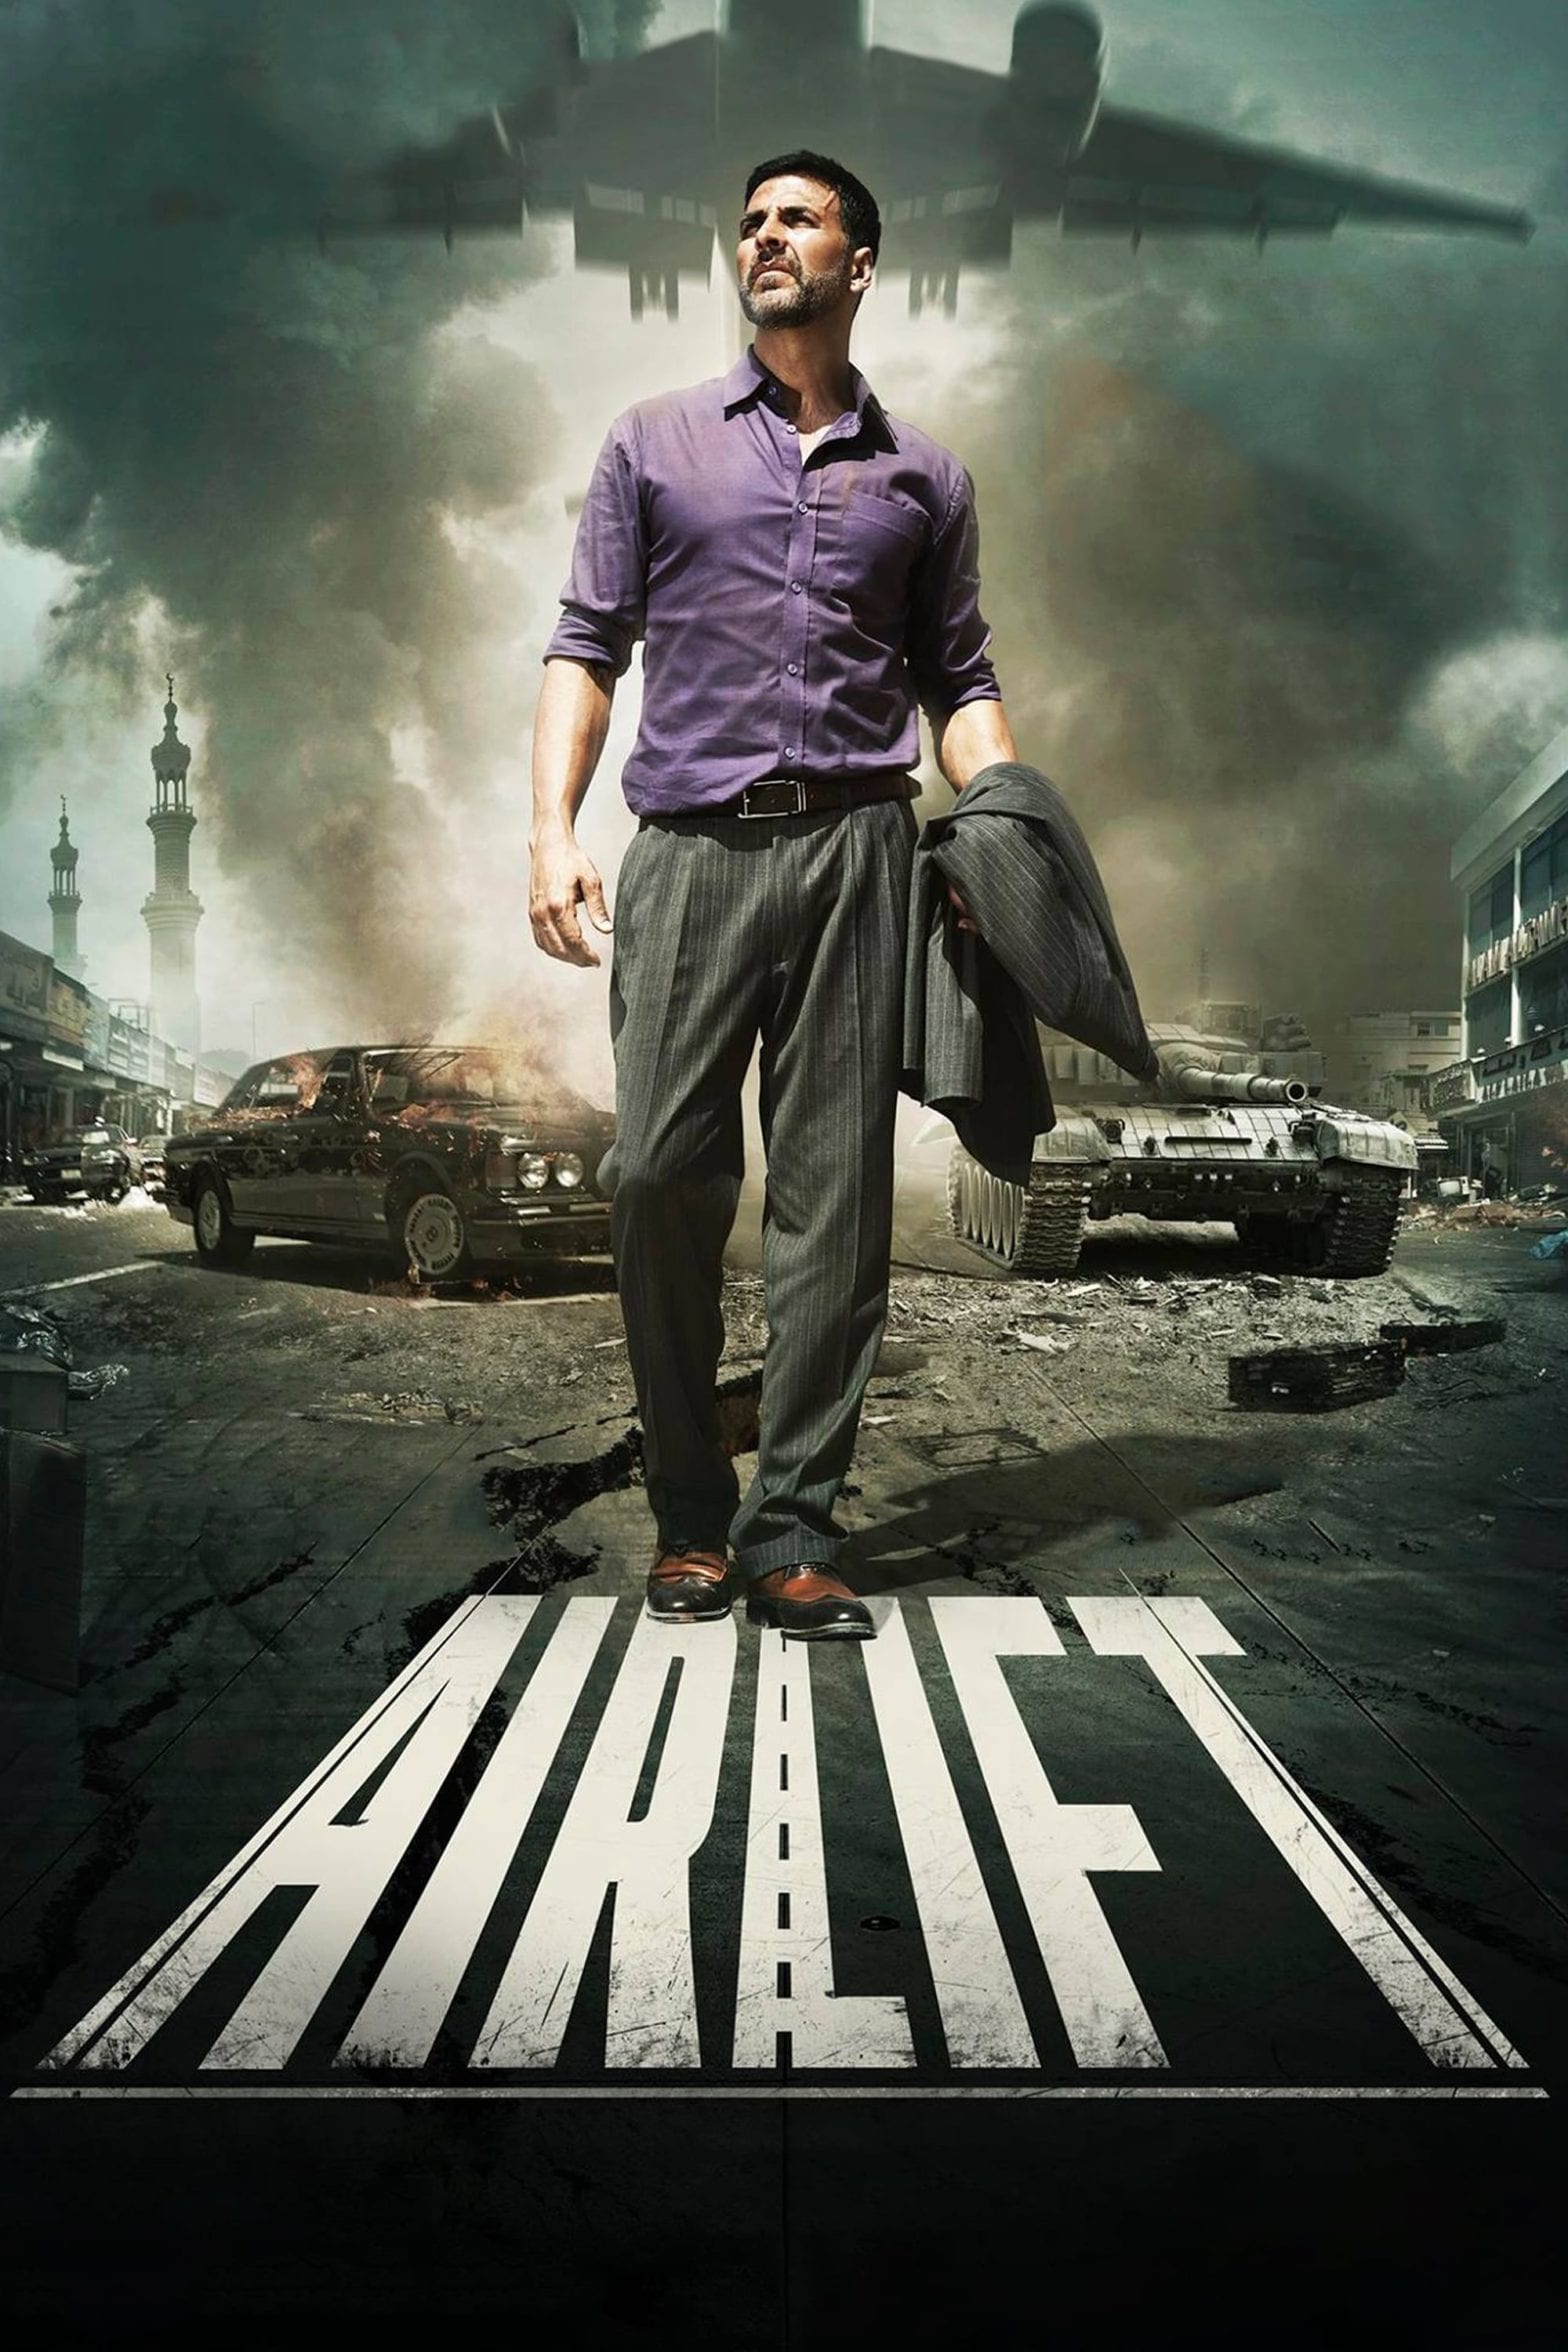 Poster for the movie "Airlift"